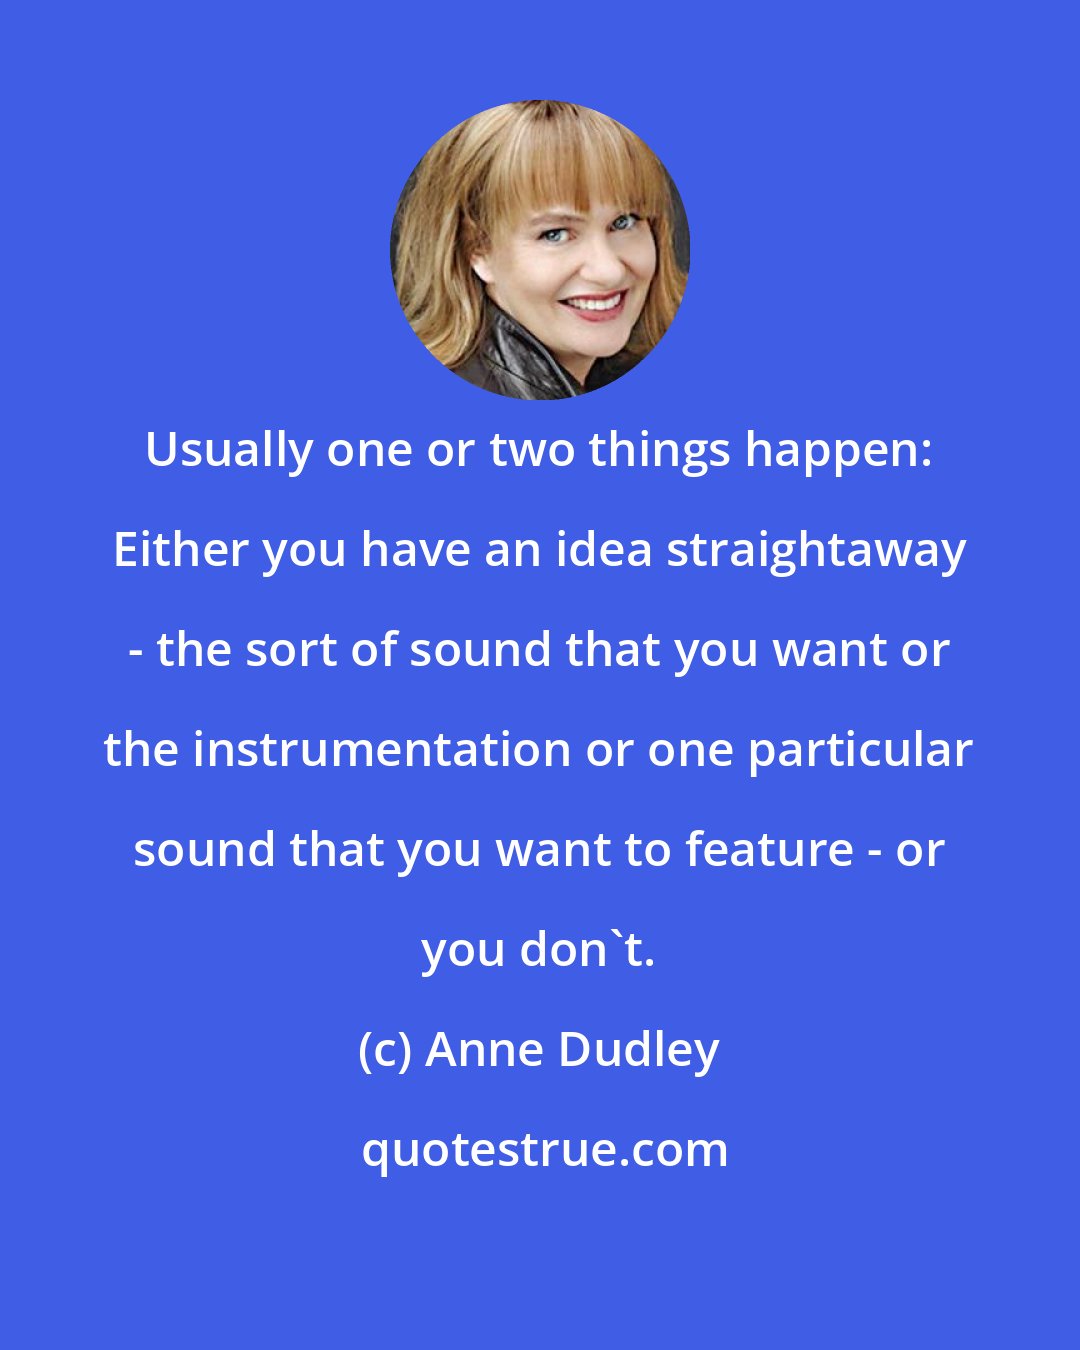 Anne Dudley: Usually one or two things happen: Either you have an idea straightaway - the sort of sound that you want or the instrumentation or one particular sound that you want to feature - or you don't.